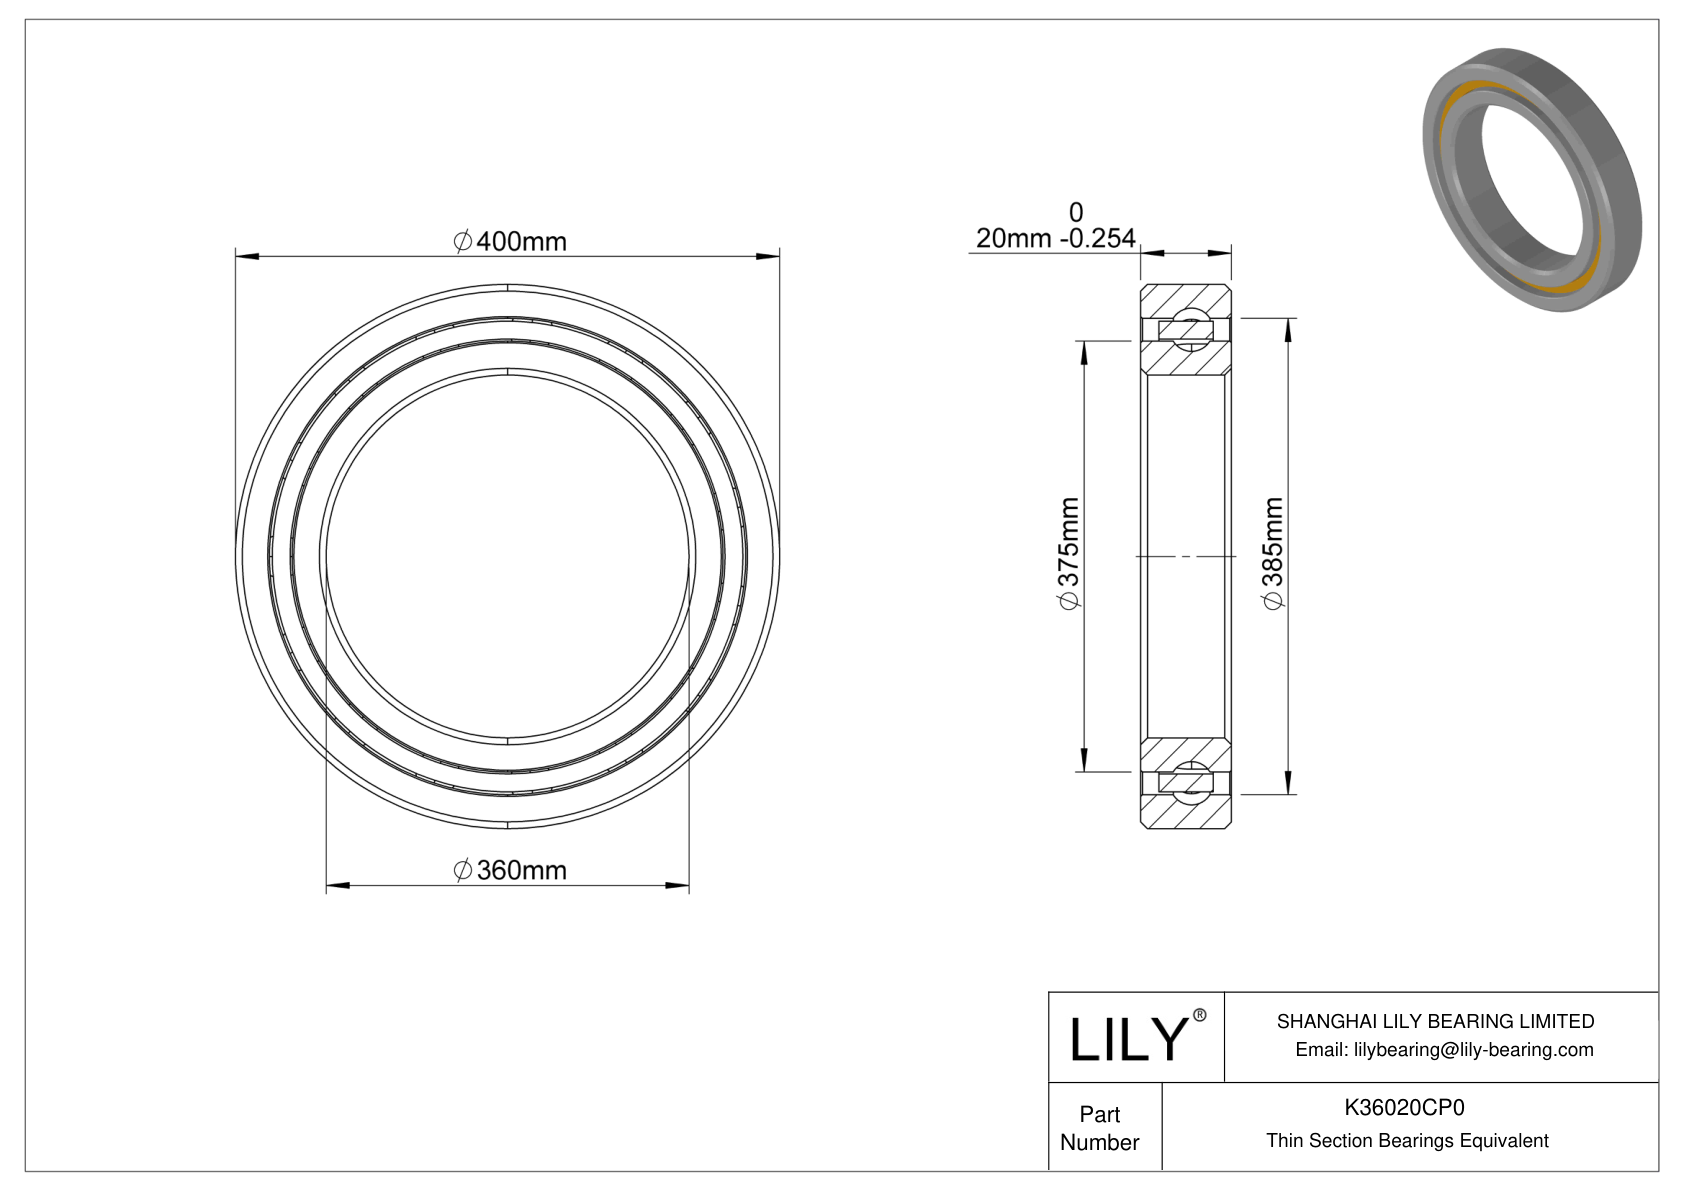 K36020CP0 Constant Section (CS) Bearings cad drawing